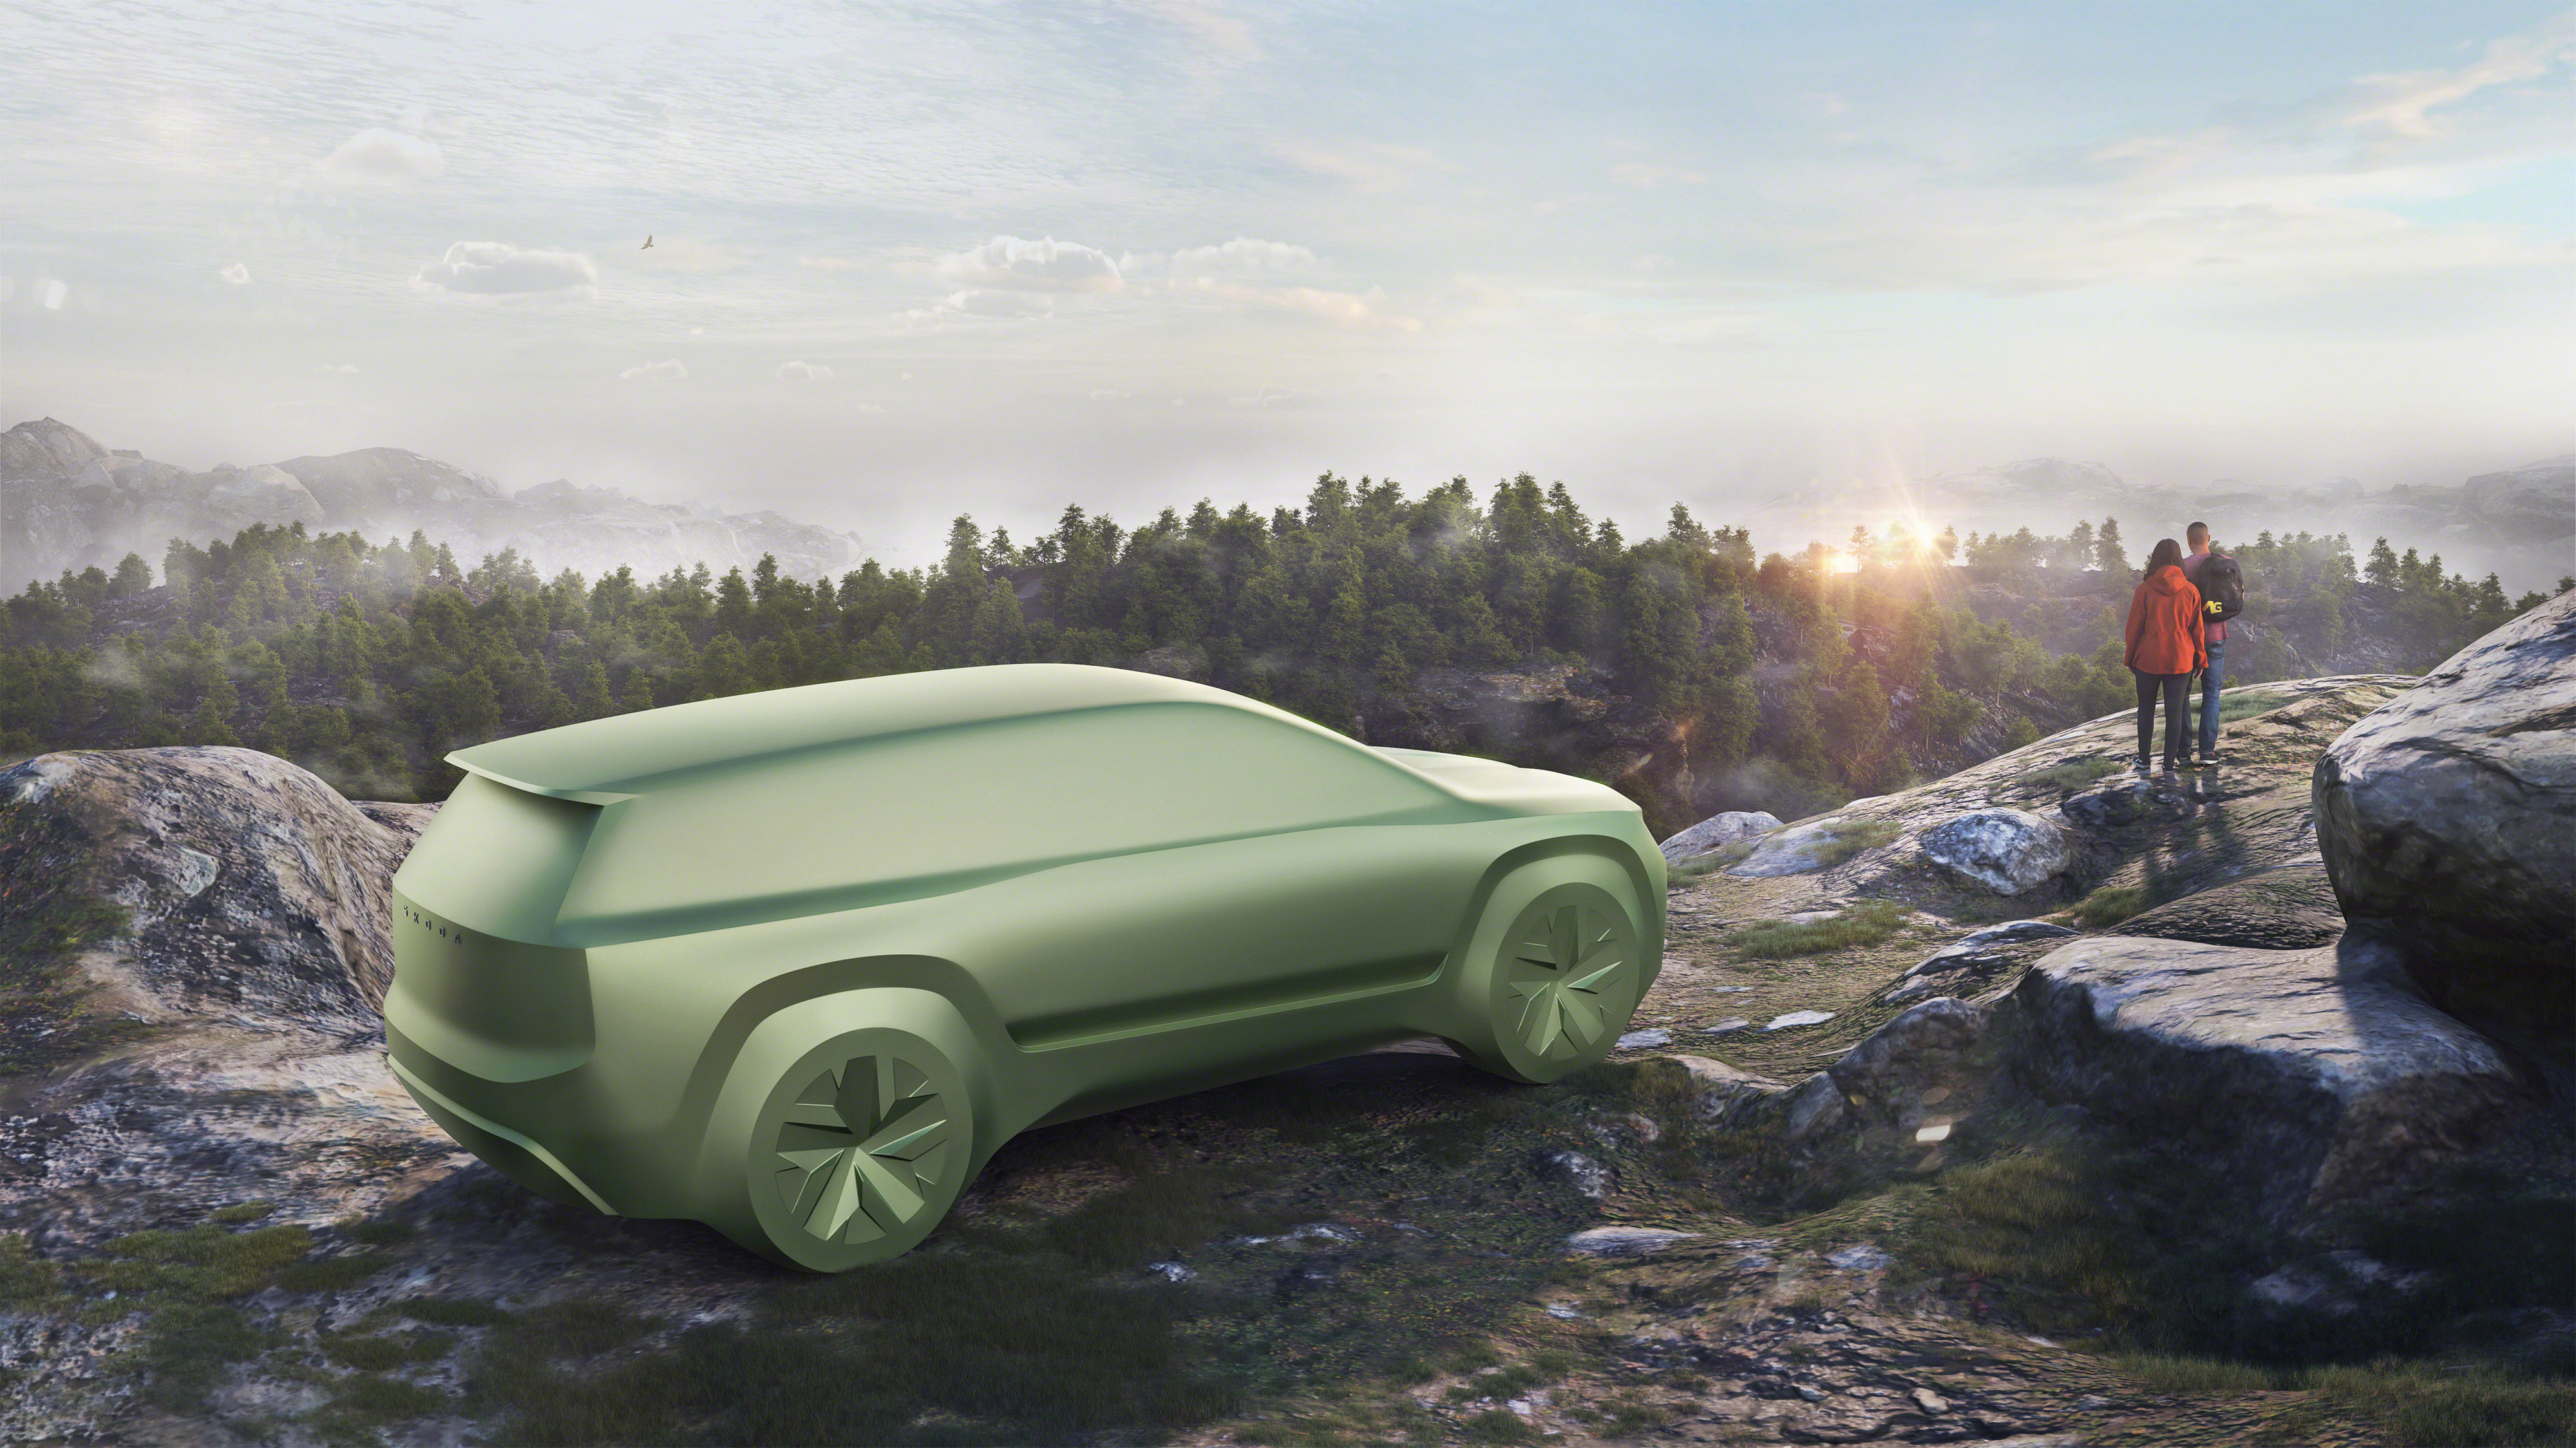 Škoda steps up its emobility campaign with six new electric vehicles